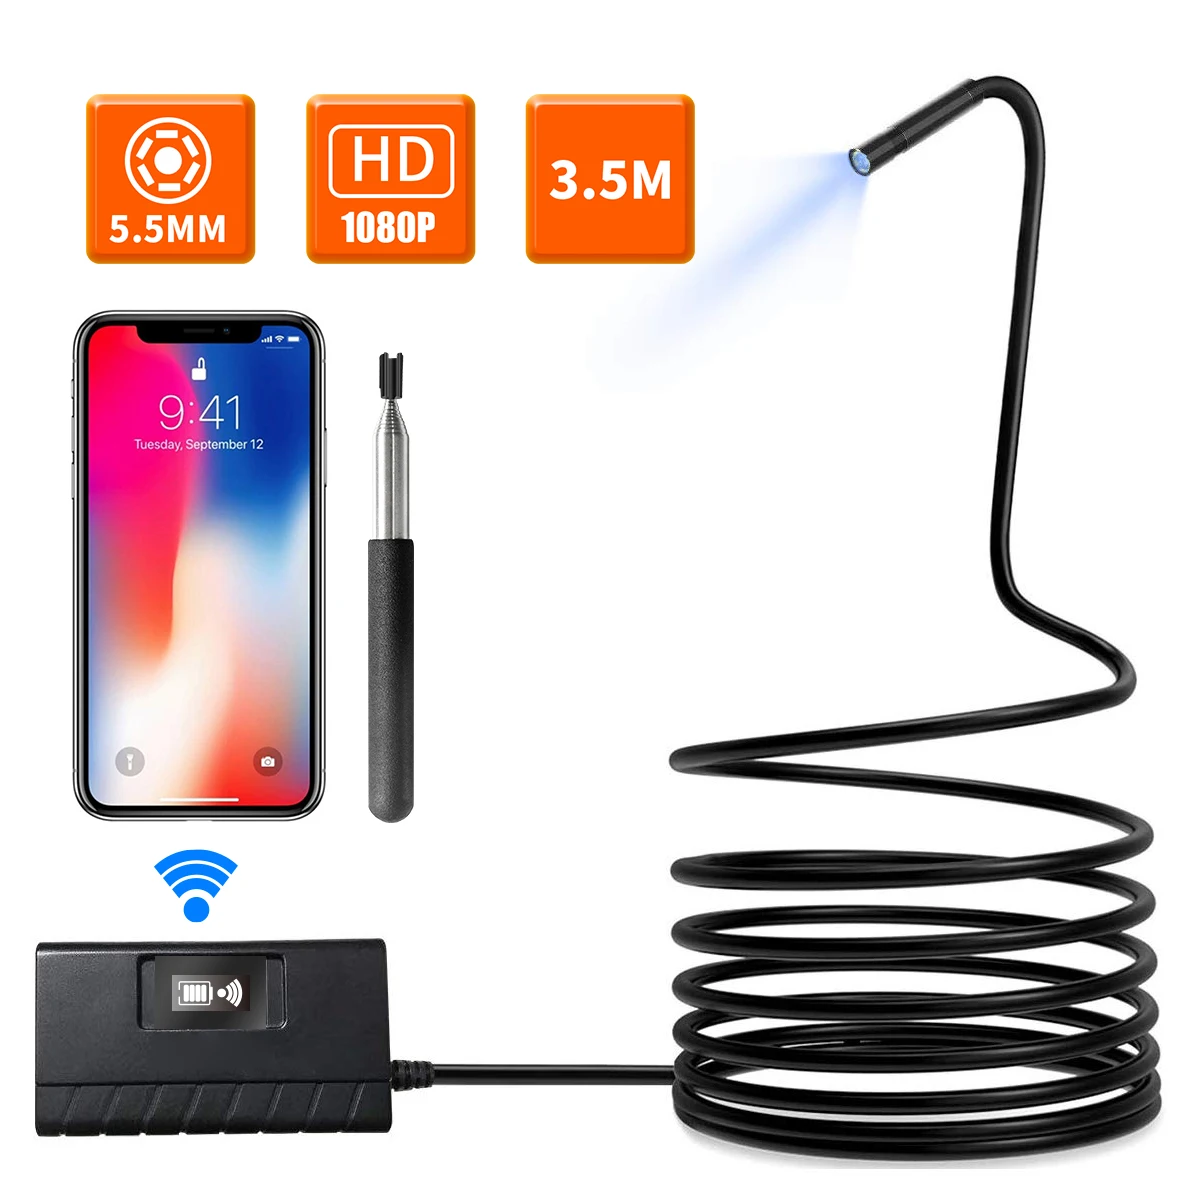 2MP 1080P 5.5MM Wireless WIFI Endoscope Inspection Otoscope Camera CMOS Borescope For Android&ISO Smart Phone Digital Microscope 2mp 1080p 50 1000x 3in1 usb digital microscope for android pc cmos borescope handheld endoscope inspection otoscope camera